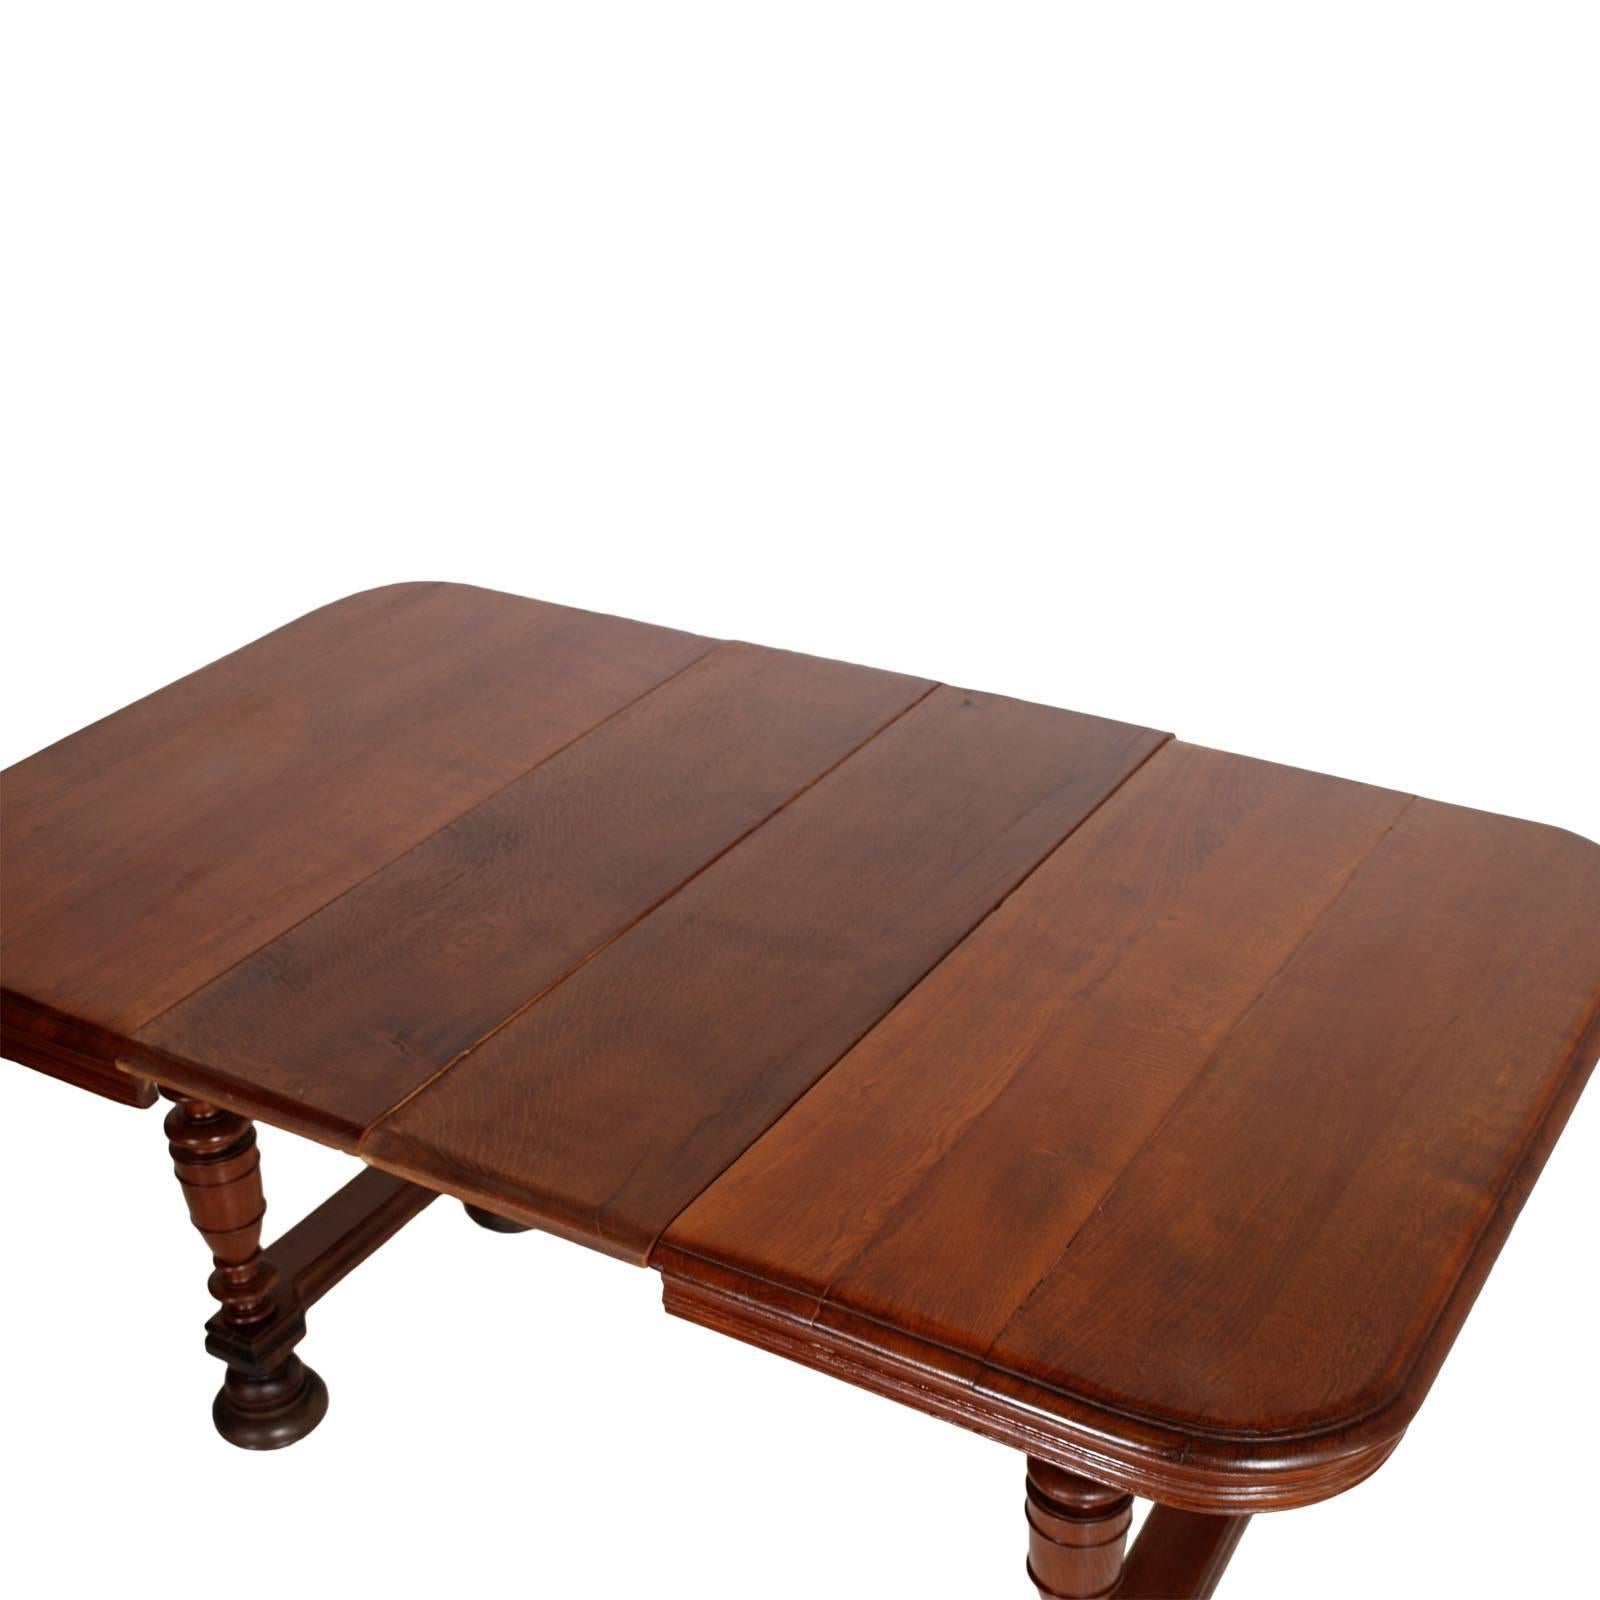 19th Century France Provencal Extendable Table Solid Oak, Restored, Wax-Polished For Sale 1